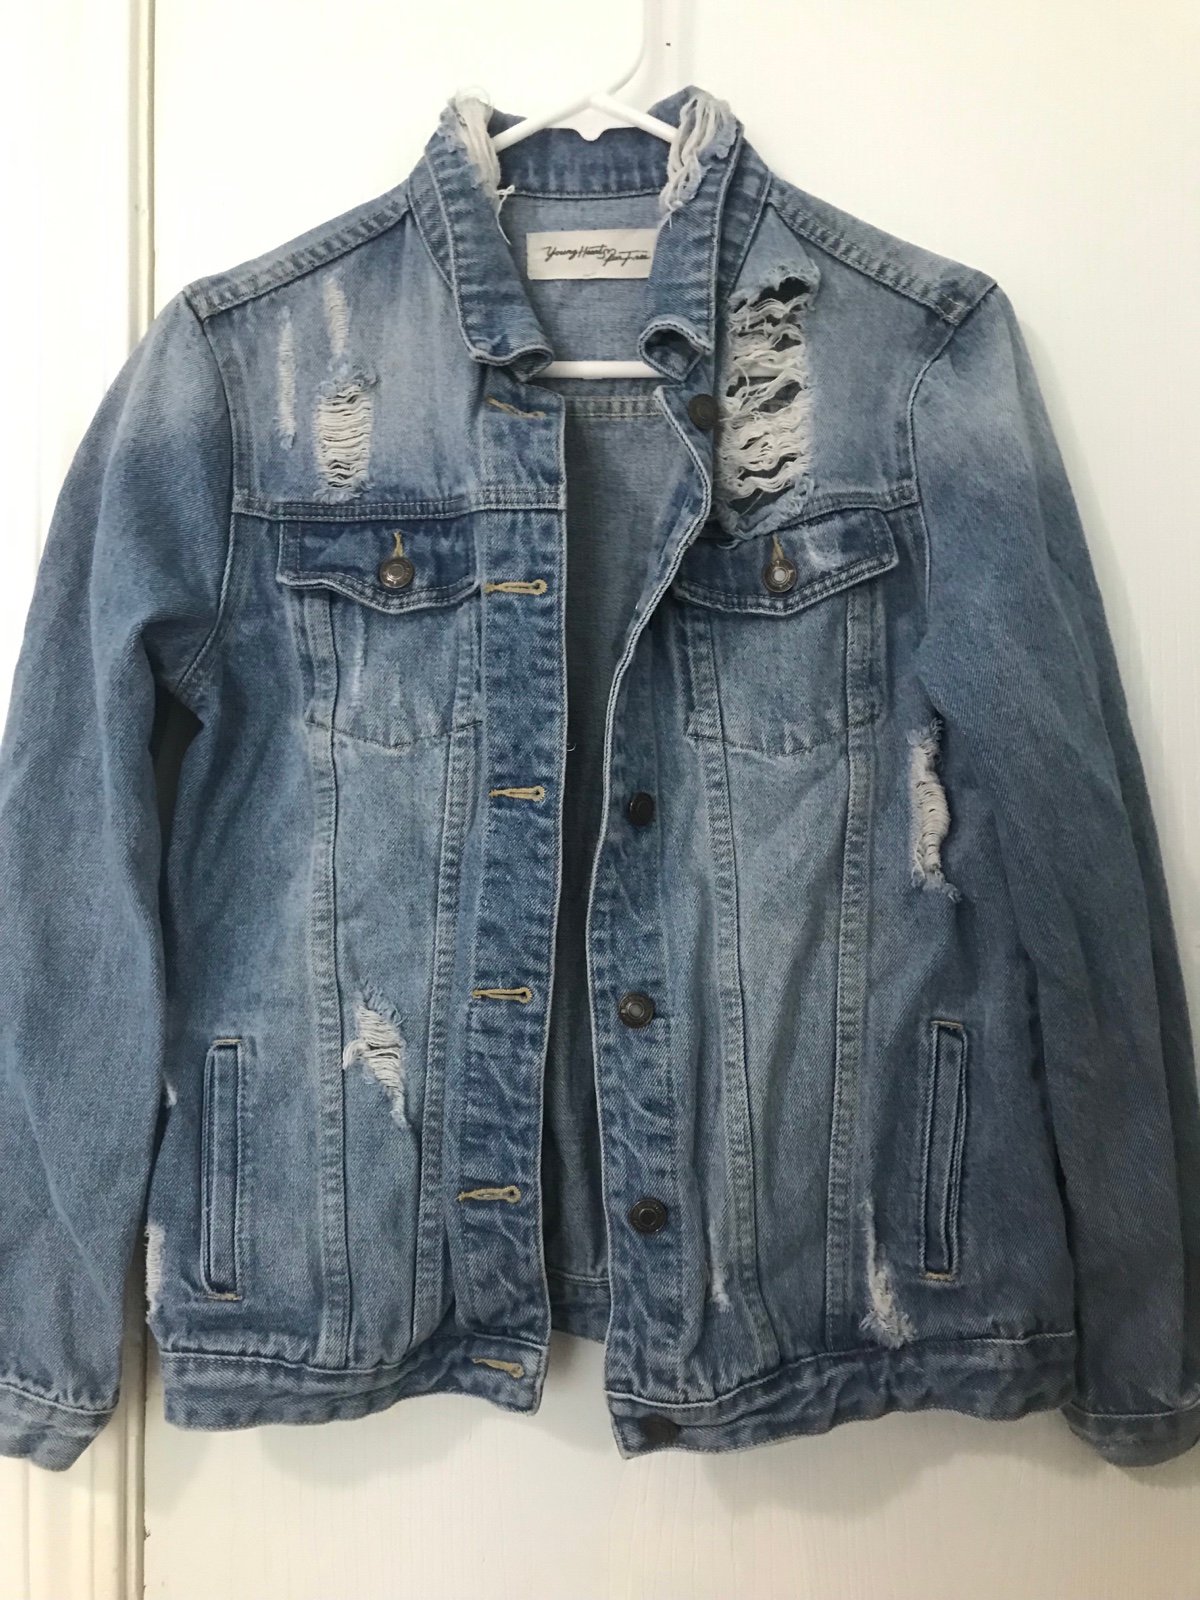 save up to 70% Ripped jean jacket LV3rZeC4m New Style